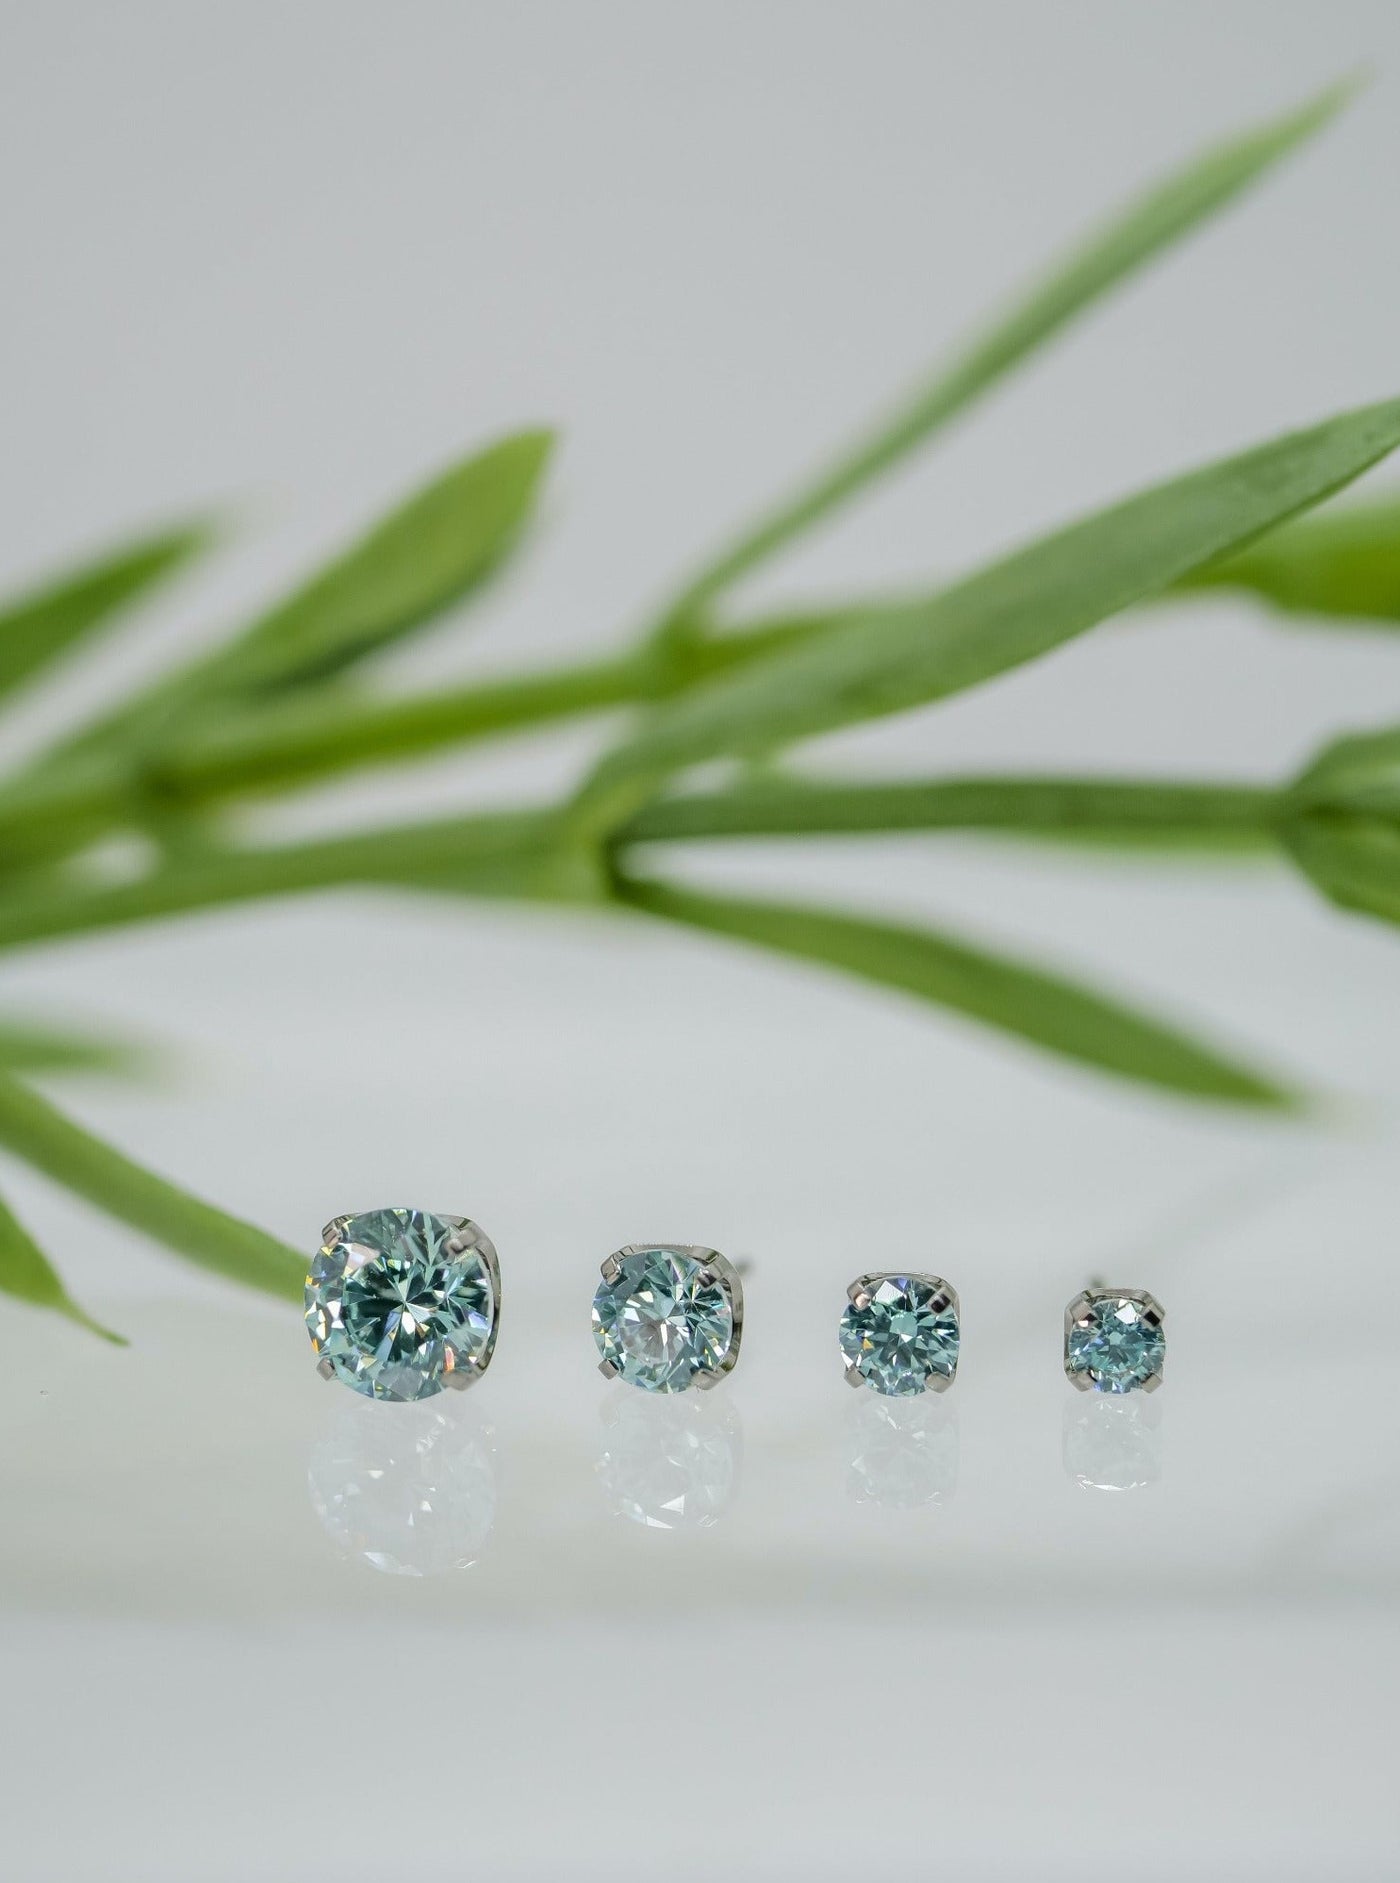 mint green cubic zirconias in prong settings ranging from 1.5mm to 4mm